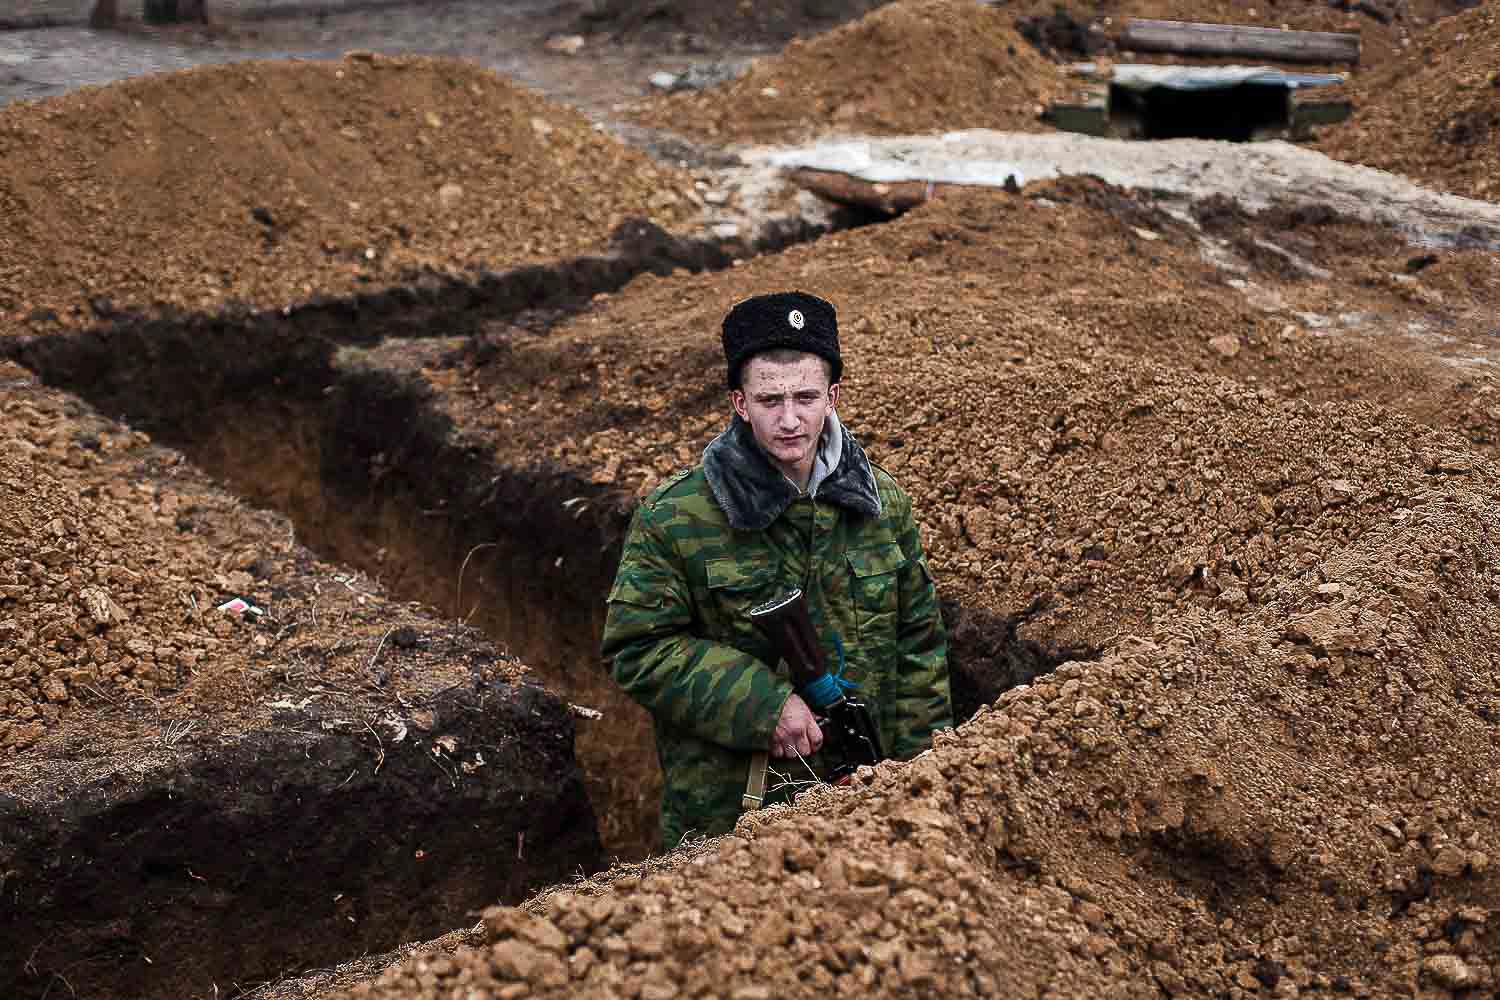 December 2014. Luhansk. Ukraine. A young Cossack soldier of pro-Russian separatist forces stands attentively in a trench near the town of Pervomaisk.